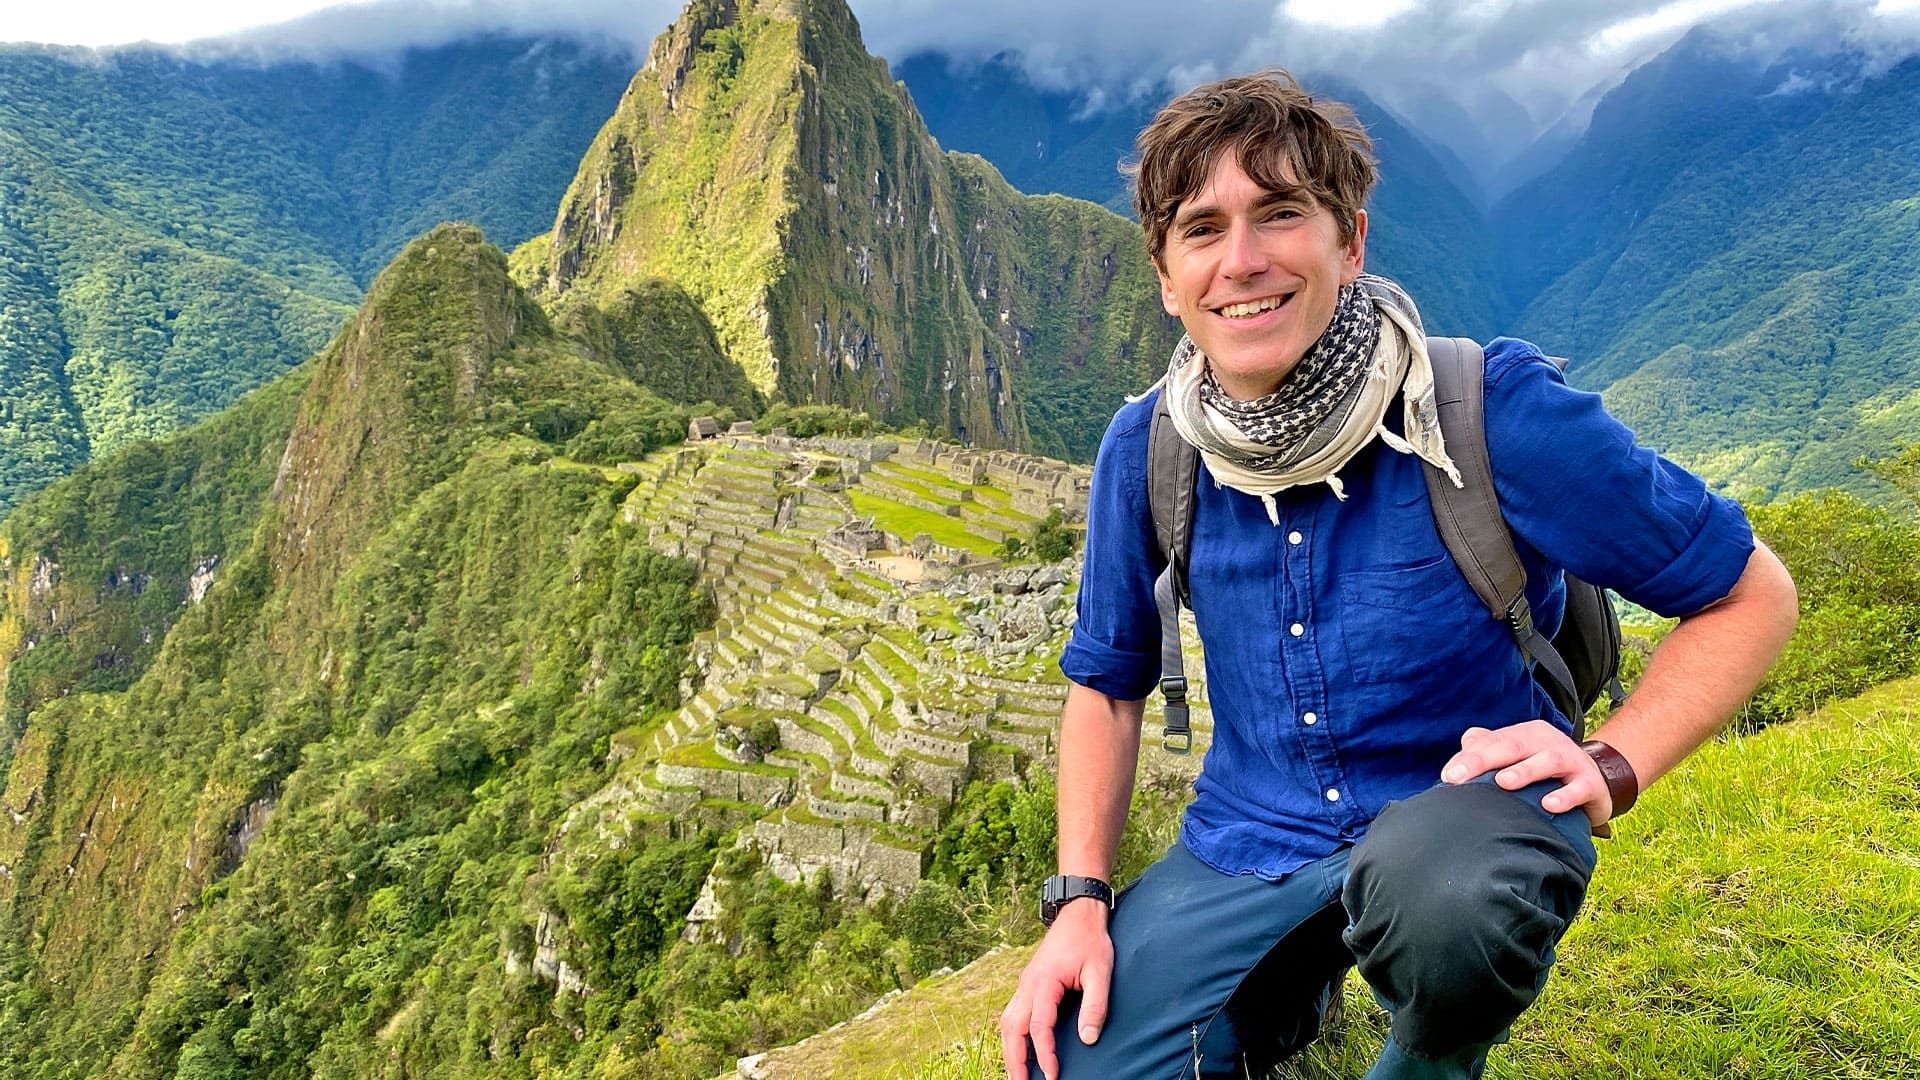 Simon Reeve's South America background